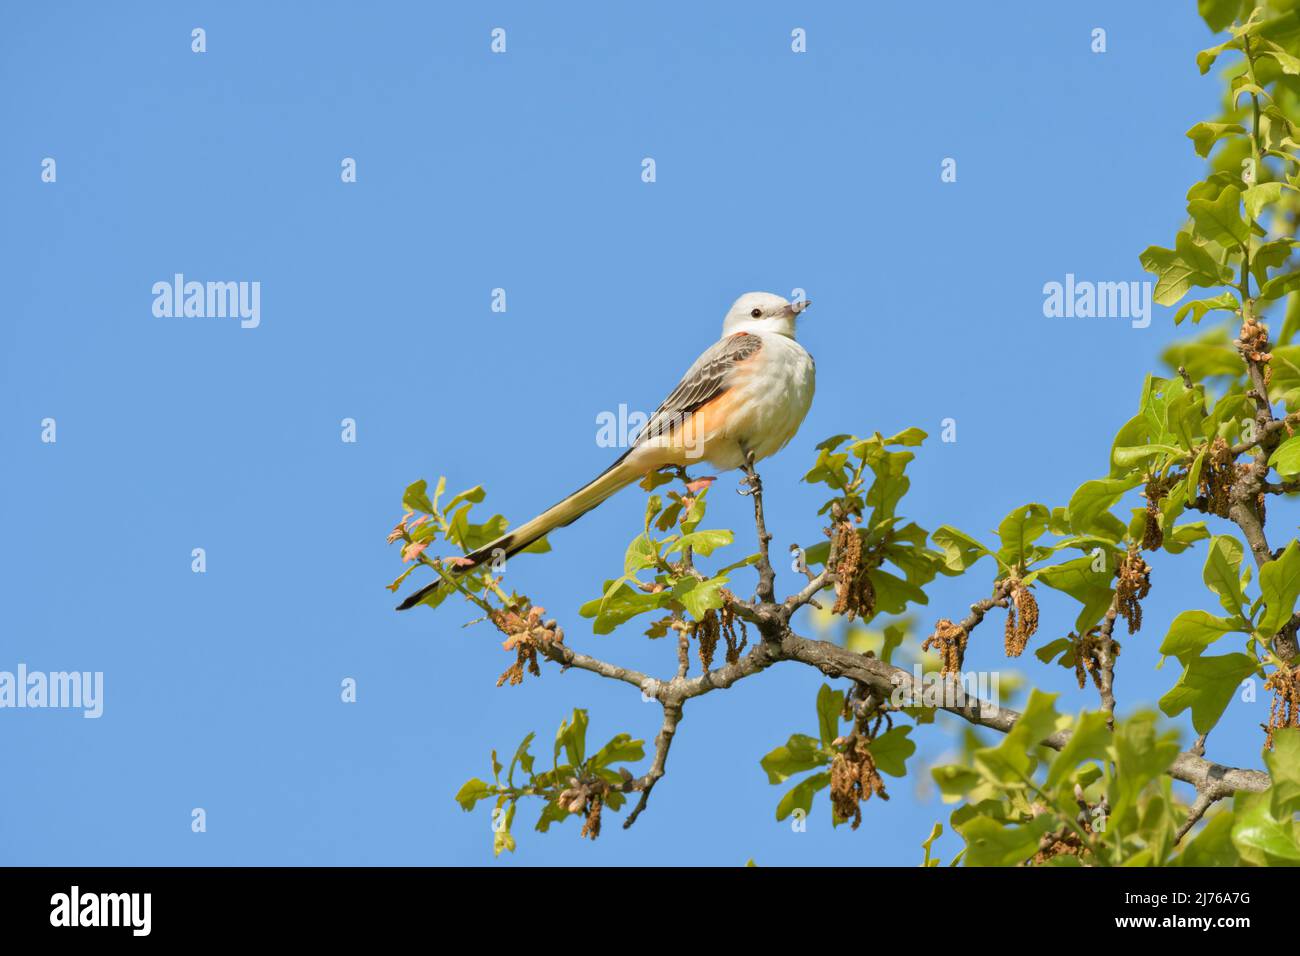 Beautiful Scissor-tailed Flycatcher perched in an oak tree in early spring, against clear blue skies; with copy space Stock Photo